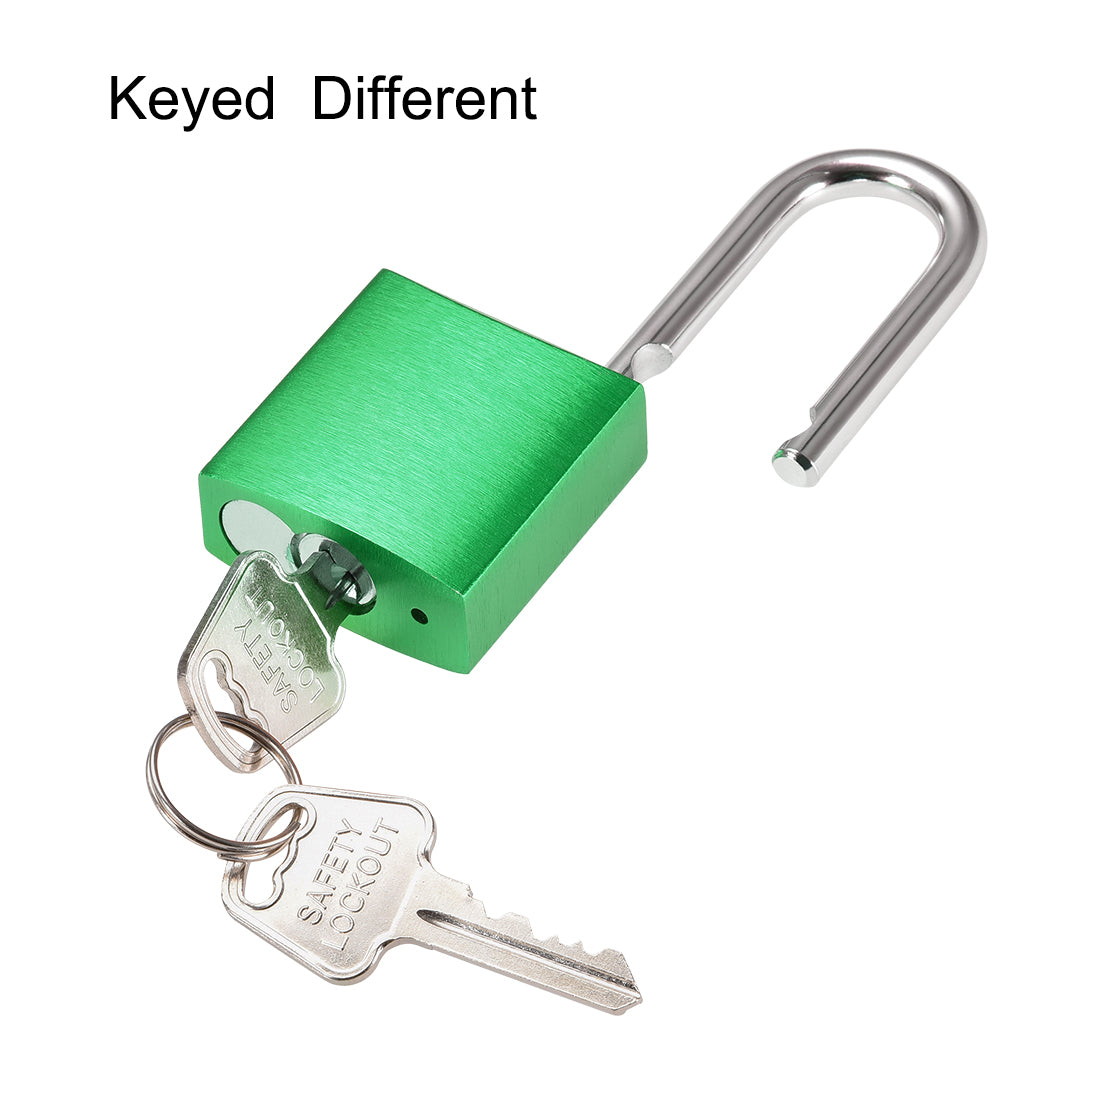 uxcell Uxcell 1-1/2 Inch Shackle Key Different Safety Padlock Aluminum Alloy Lock Green